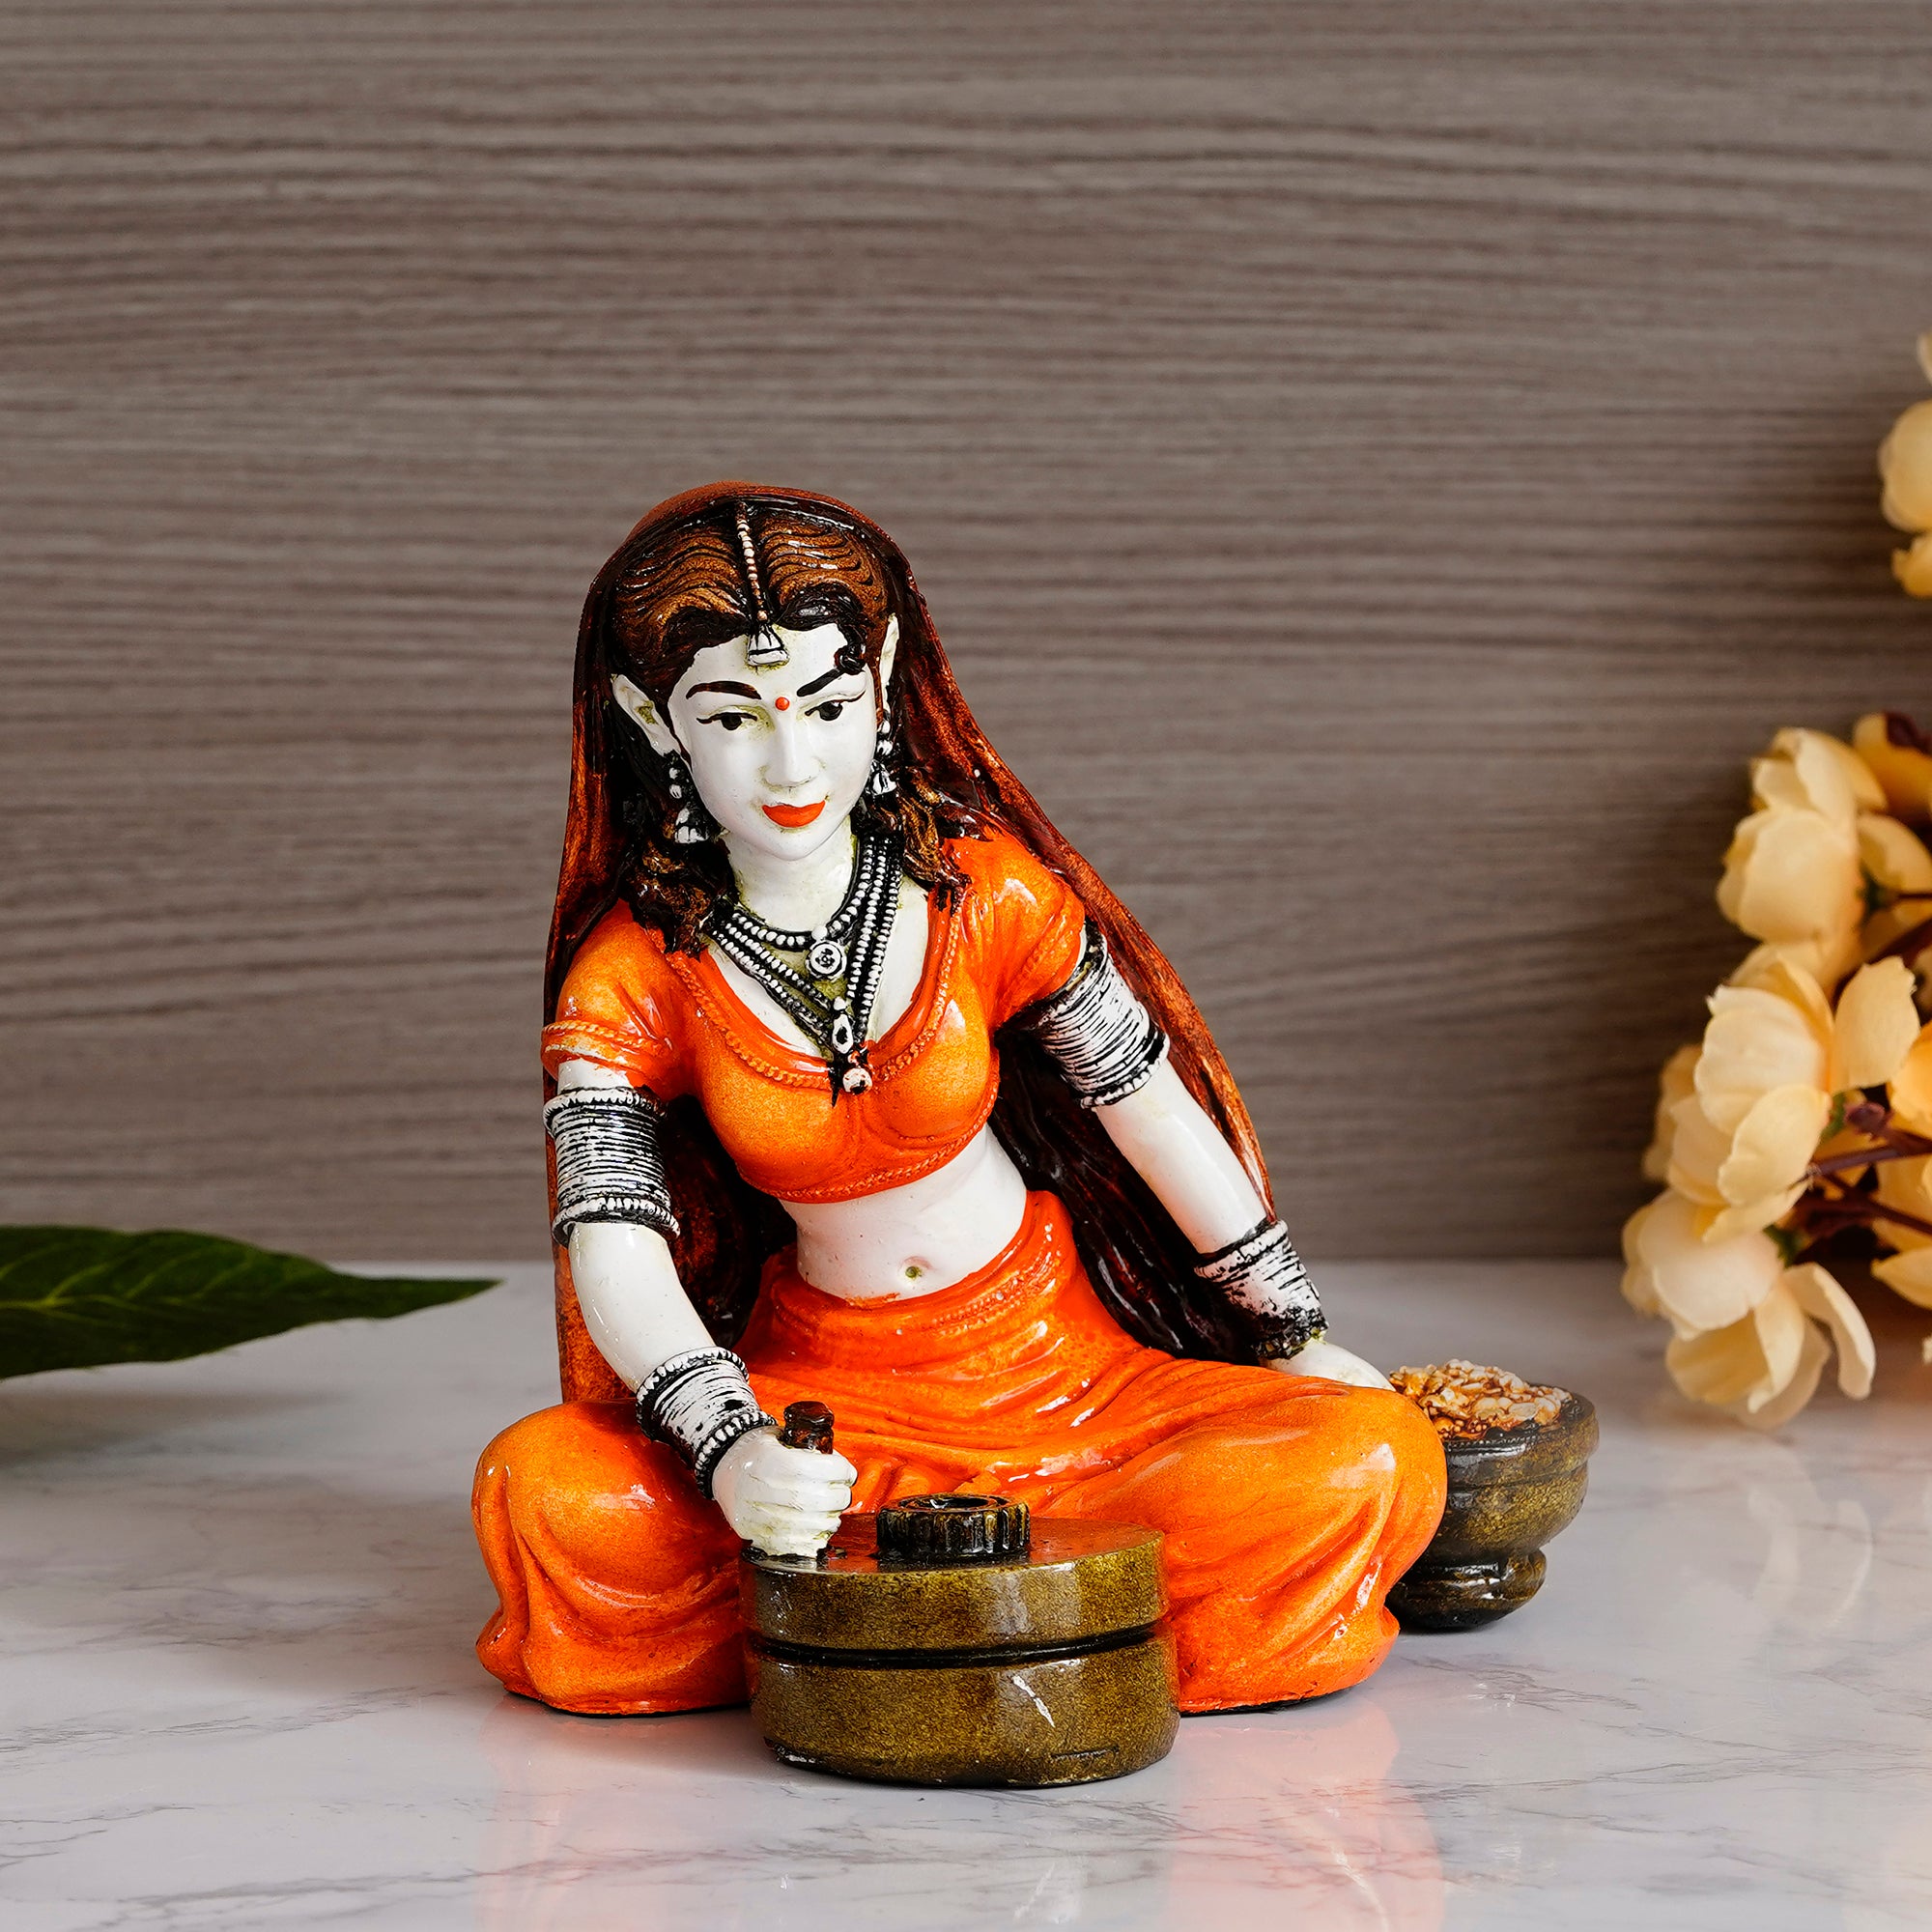 Polyresin Rajasthani Women Statue Using Traditional Flour Mill Handcrafted Human Figurine Decorative Showpiece 1